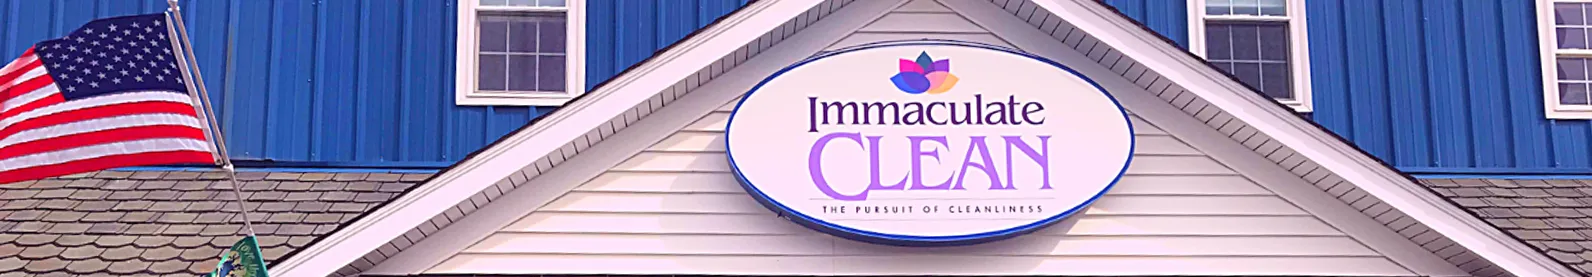 The logo of Immaculate Clean placed on top of their office's entrance.